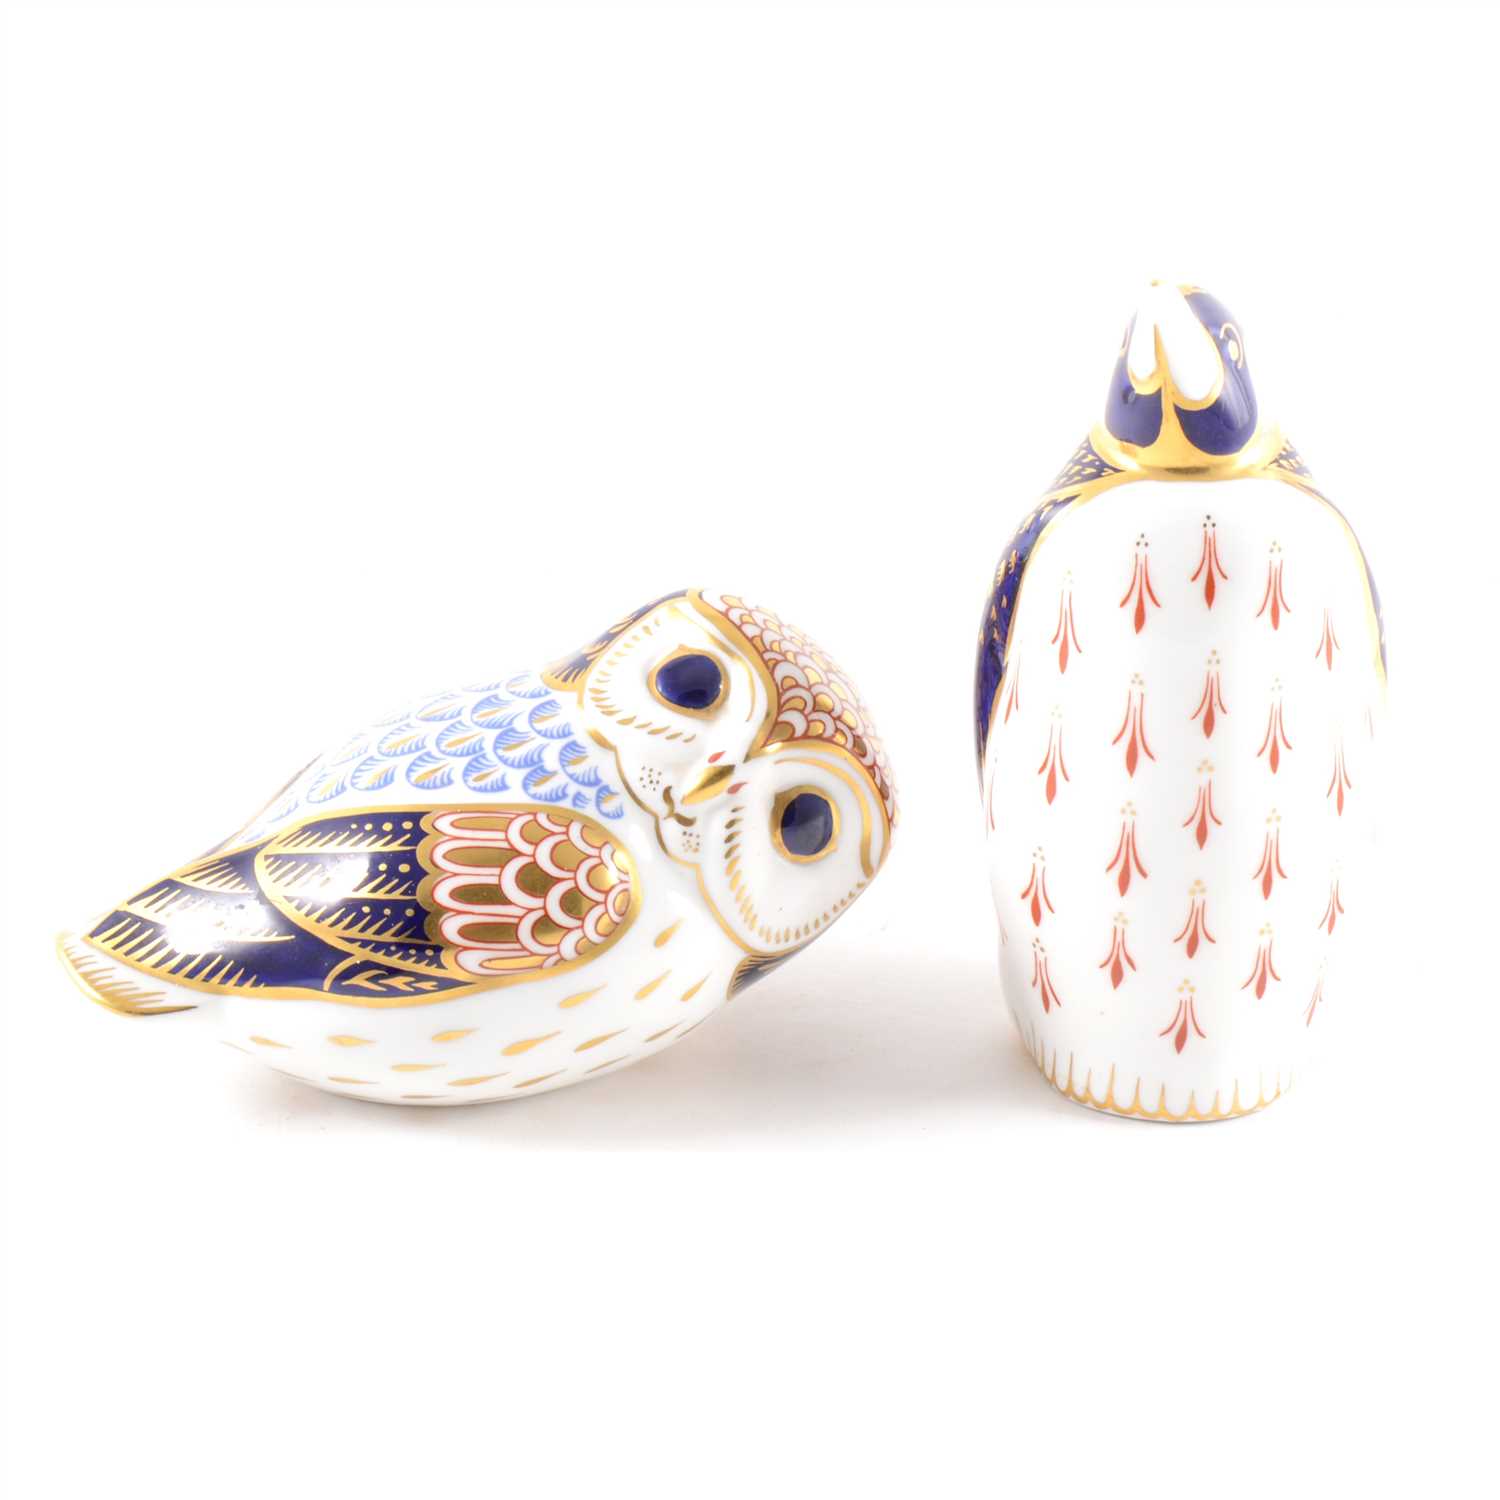 Lot 41 - A Royal Crown Derby paperweight, modelled as a Penguin, and an Owl